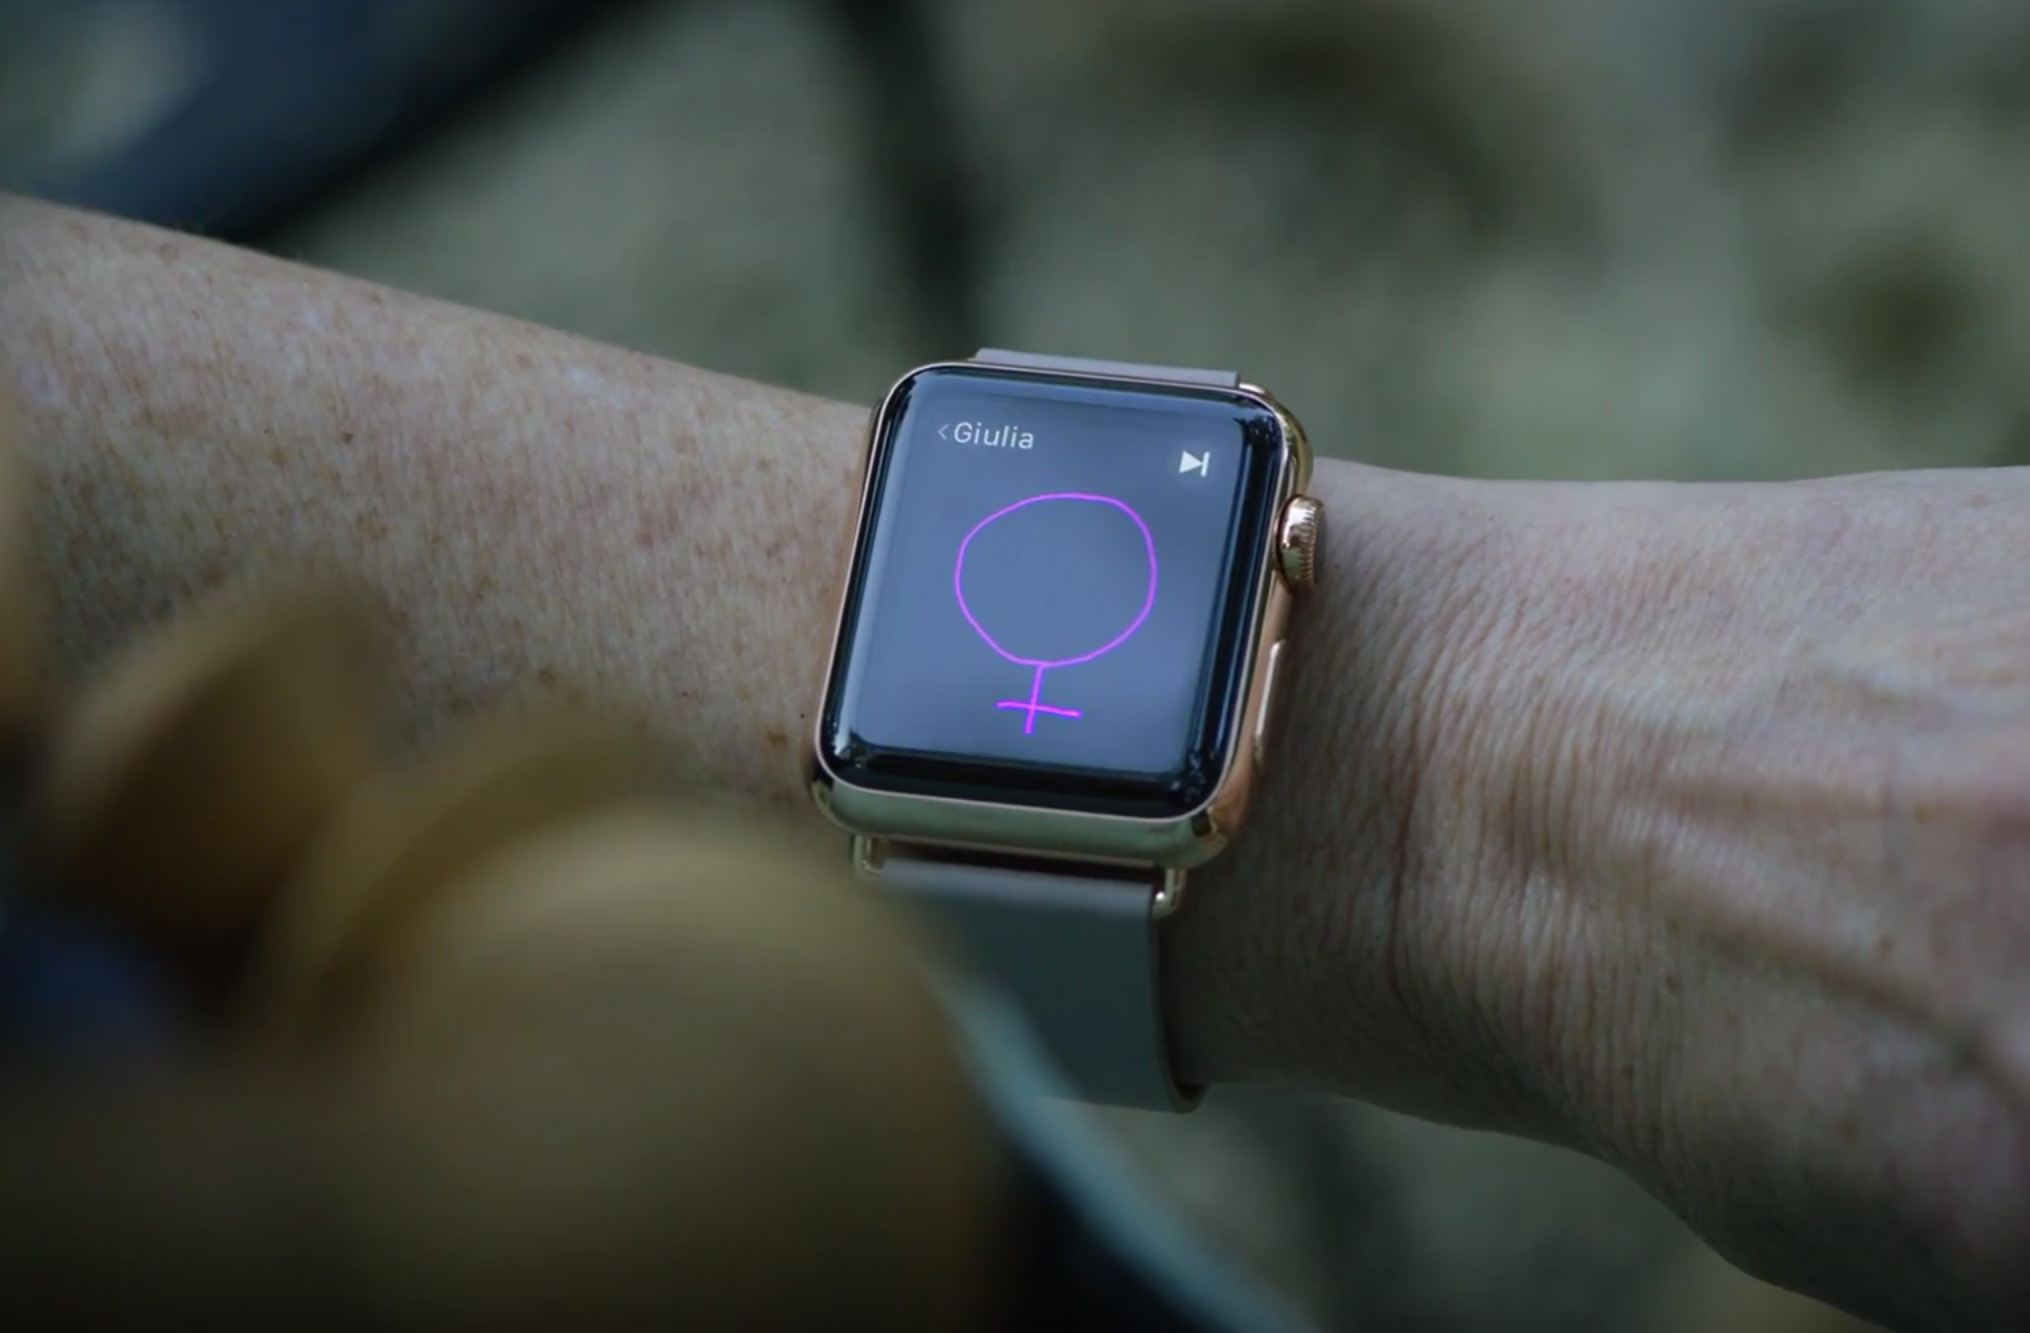 Apple publishes four new commercials showing the use of Watch in real life